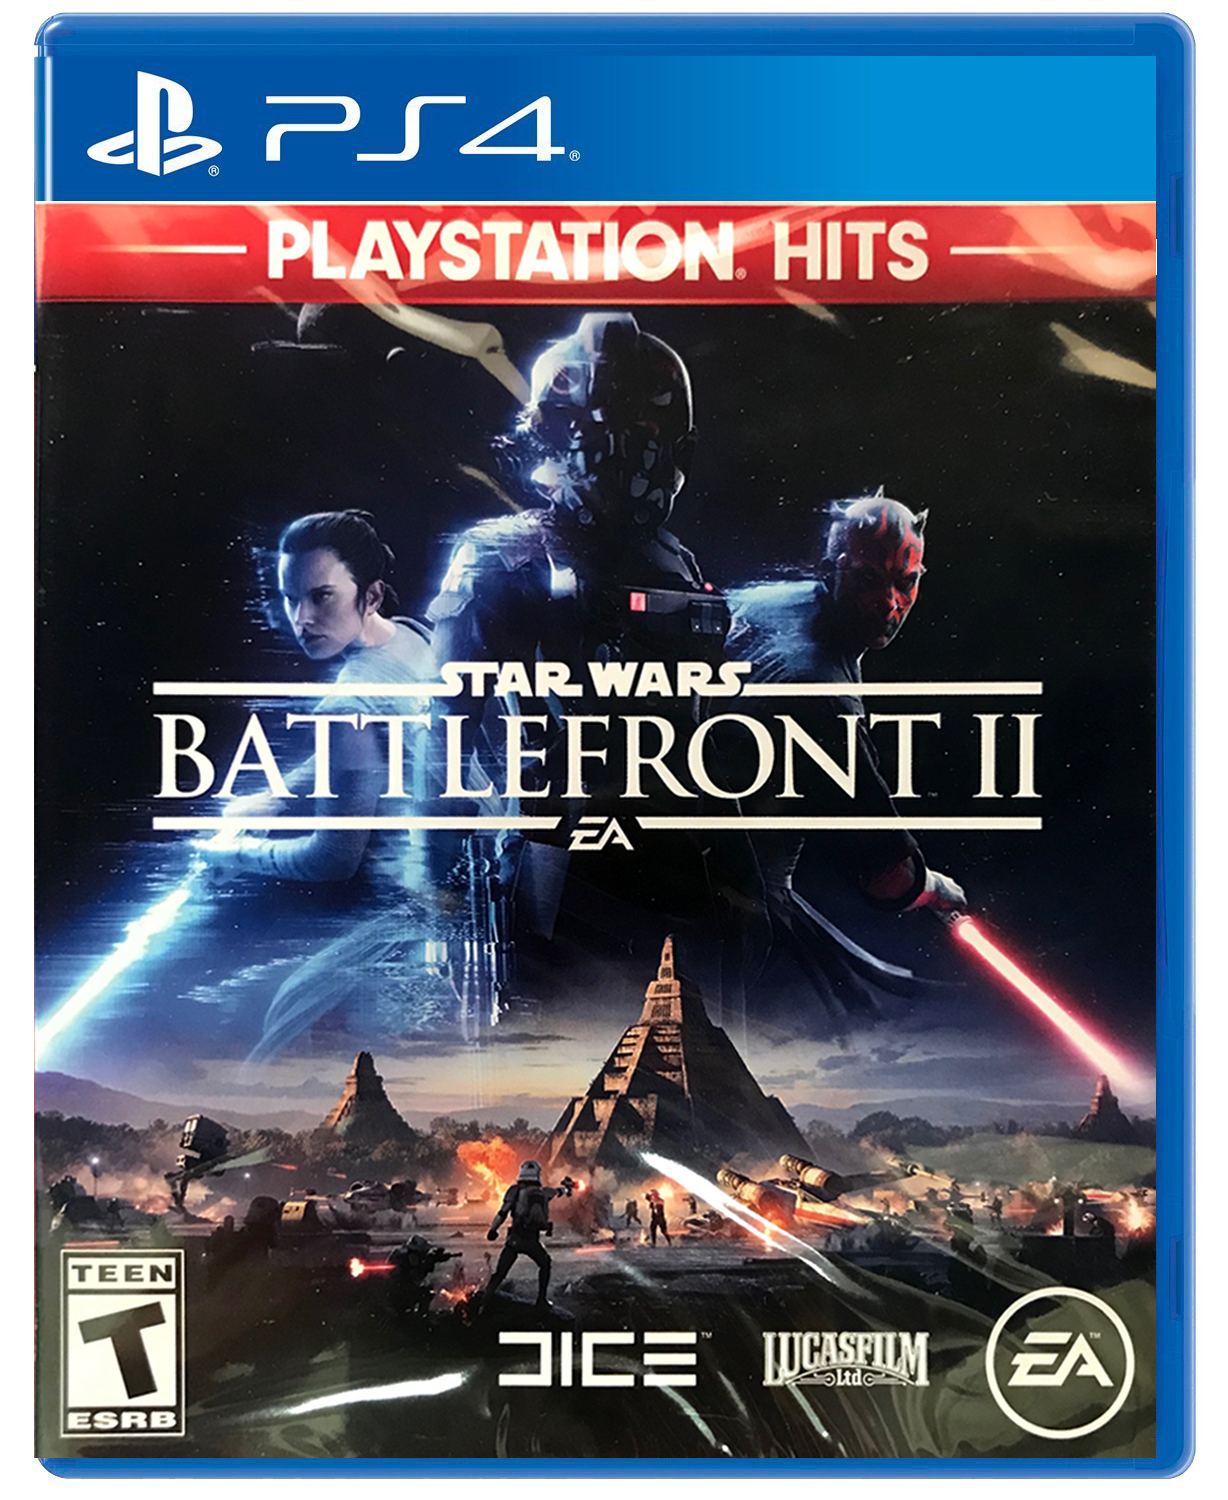 Battlefront 2 ps4. Стар ВАРС батлфронт 2 ps4. Battlefront 2 ps4 диск. Star Wars Battlefront ps4 диск. Battlefront 2 на пс4.